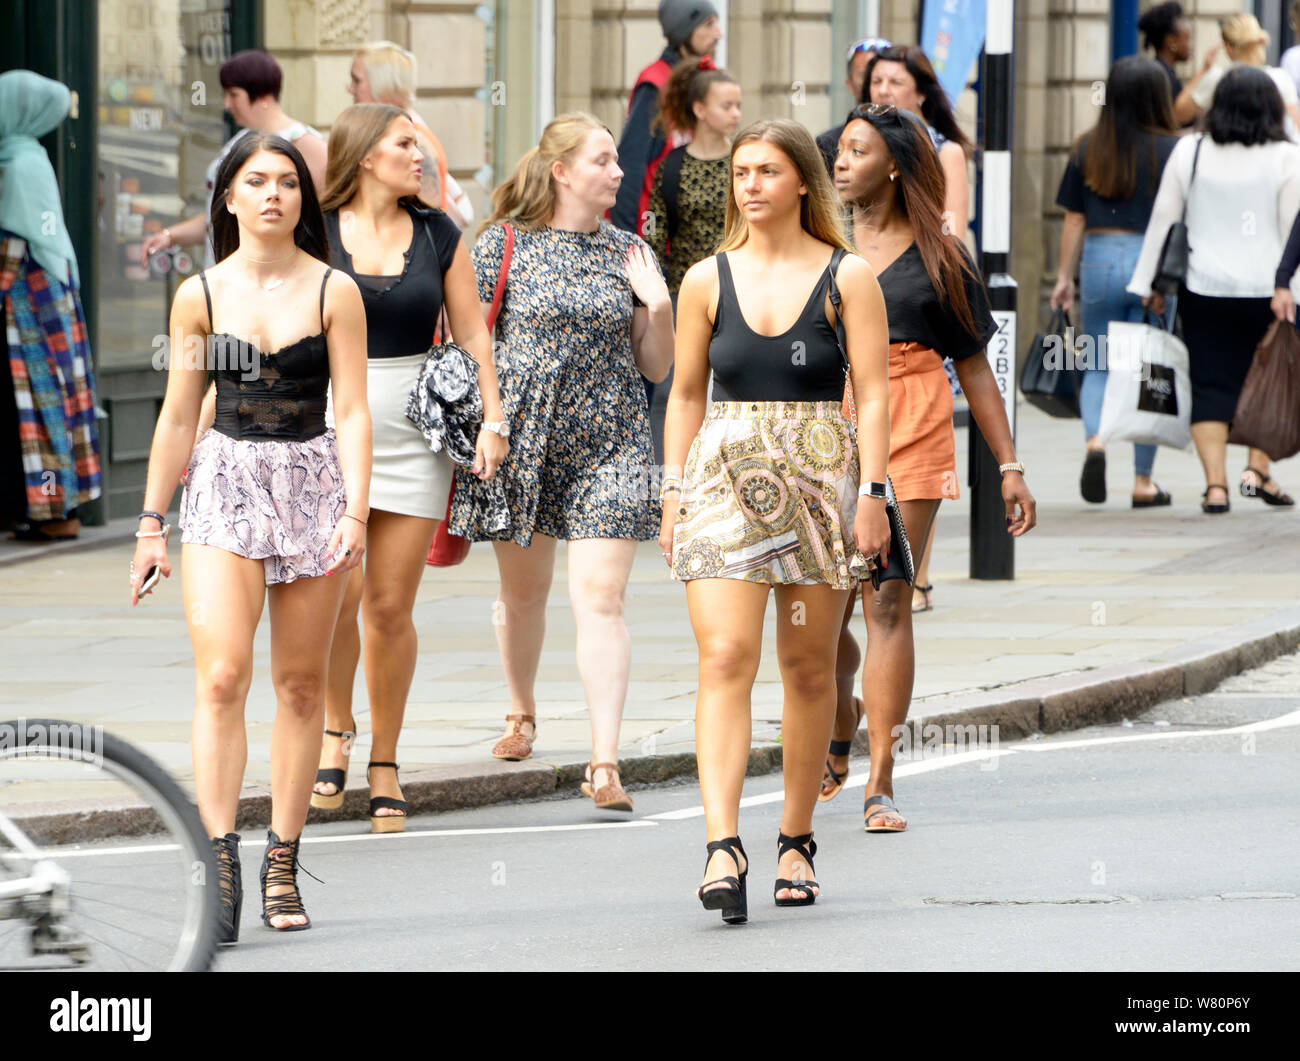 Group of summery looking girls out shopping. Stock Photo